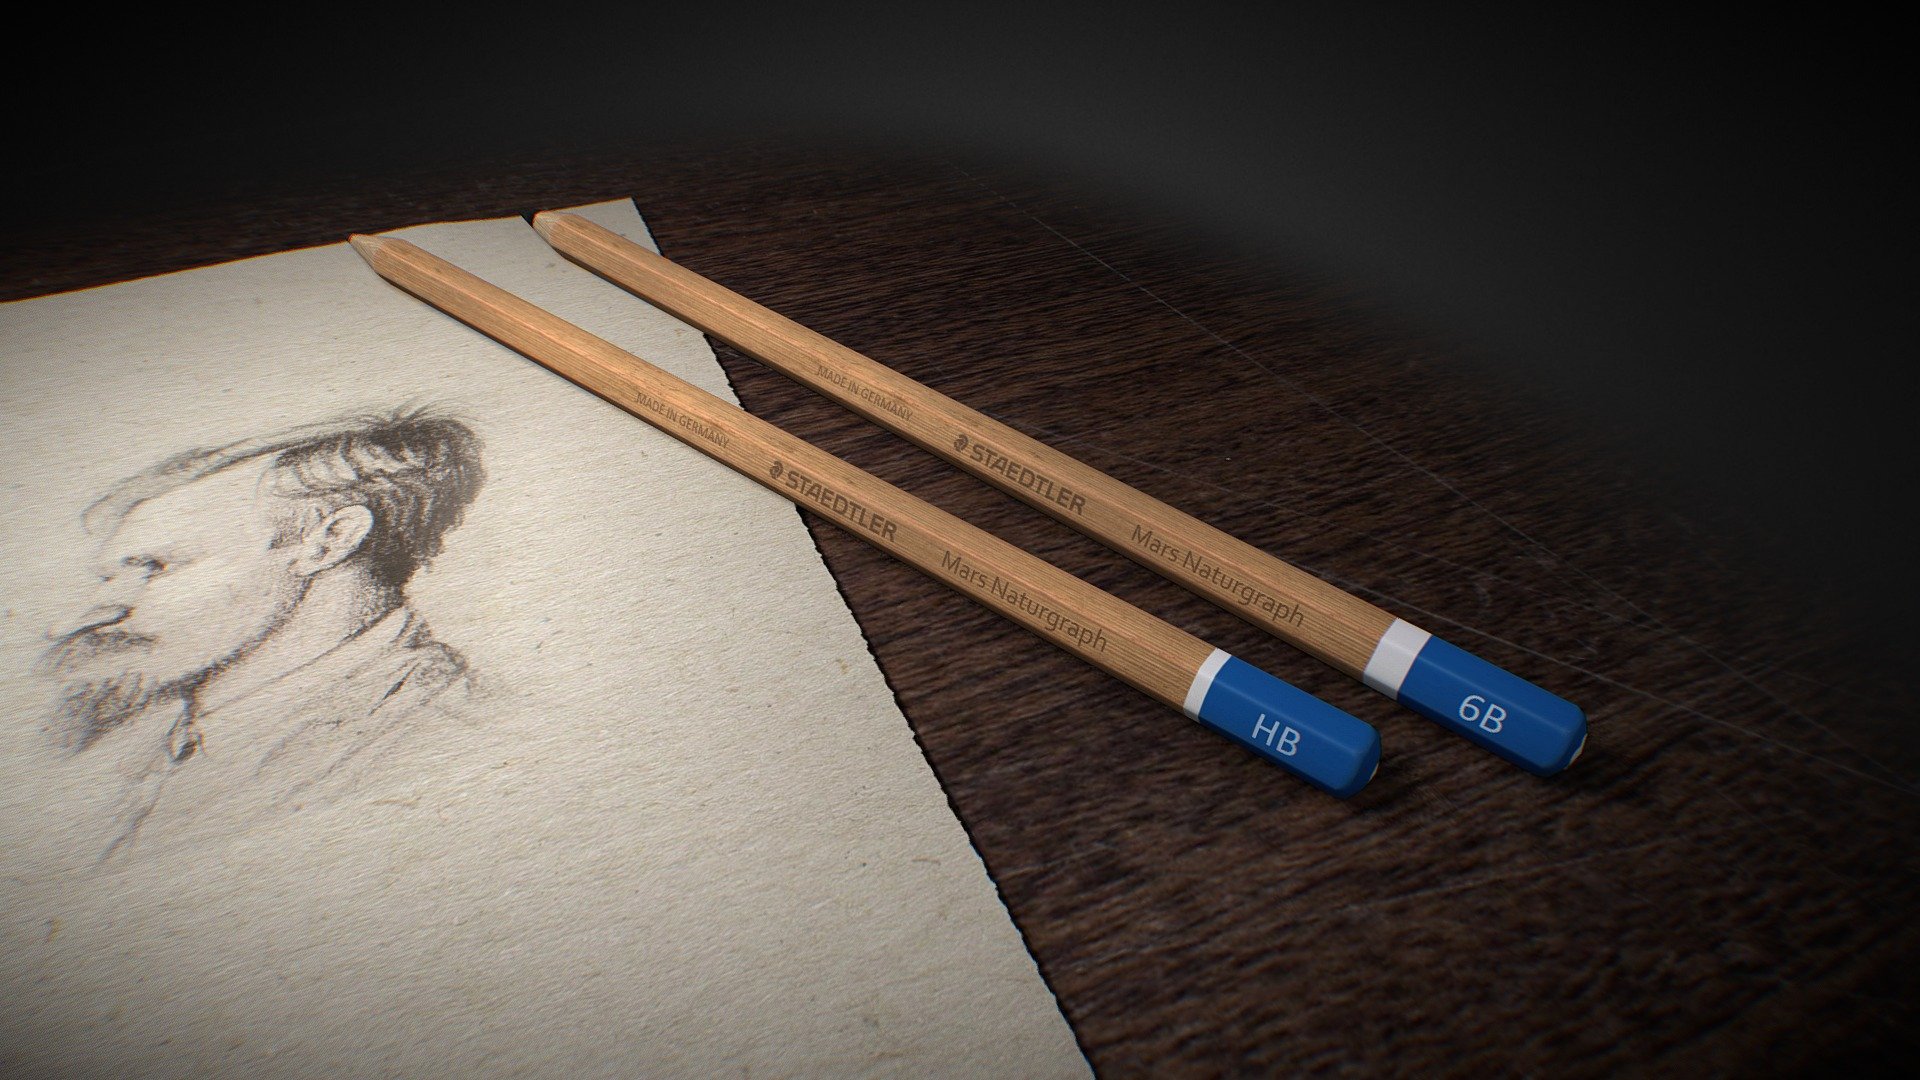 Proposal for a simpler, more natural looking Lumograph pencil, using less paint/lacquer and adding extra grade readability.Wood texture from: http://fav.me/d1kpyer - STAEDTLER proposal - 3D model by Zafio 3d model